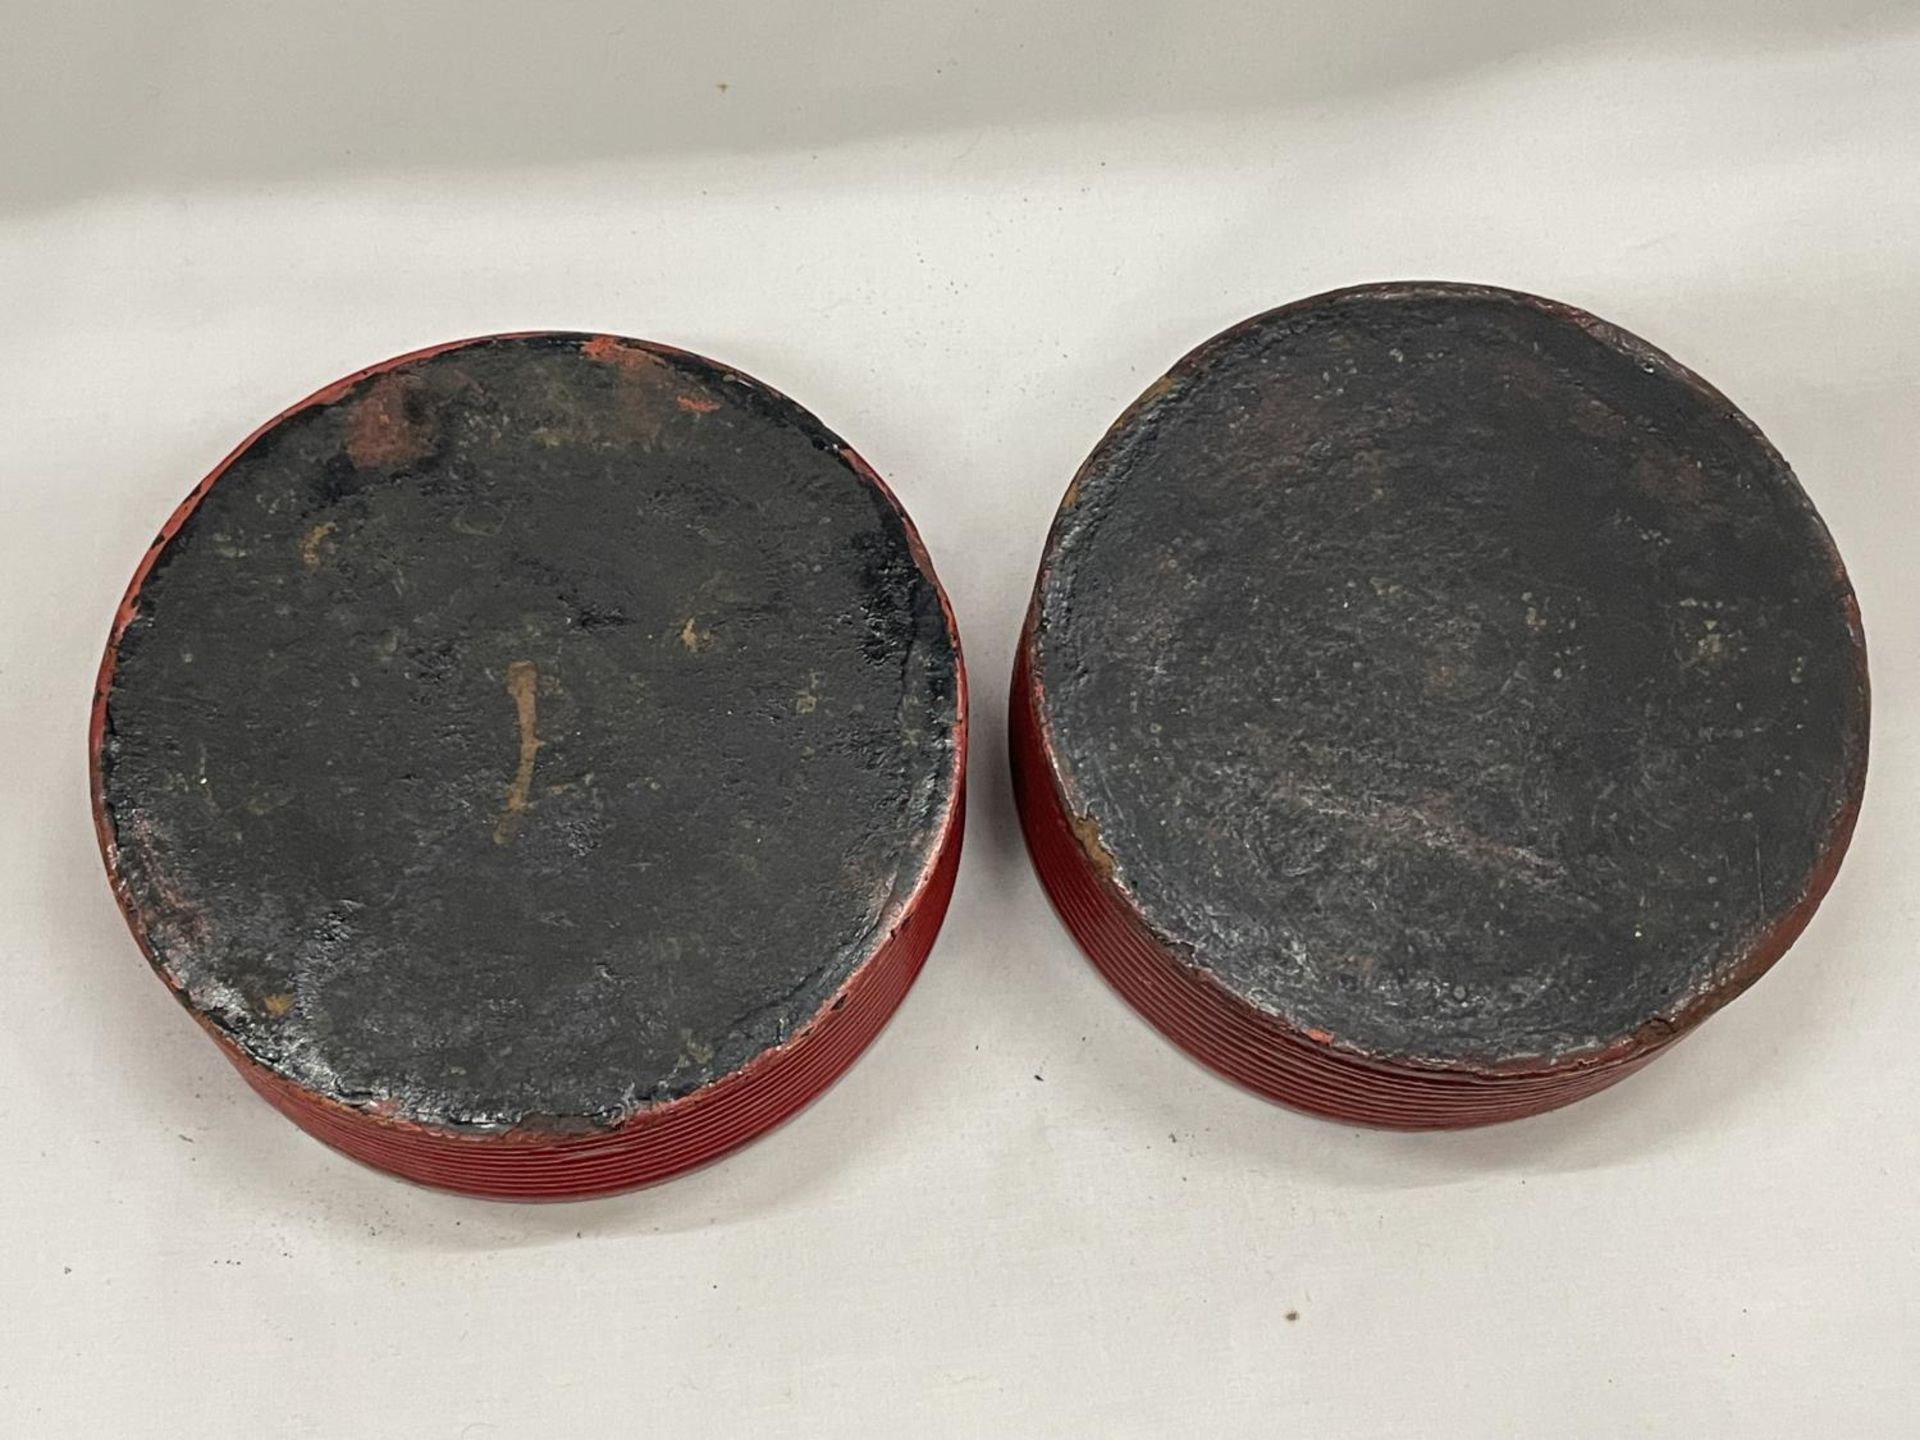 A PAIR OF BELIEVED ENGLISH REGENCY CIRCA 19TH CENTURY WINE COASTERS IN CINNABAR RED LACQUER - Image 4 of 4